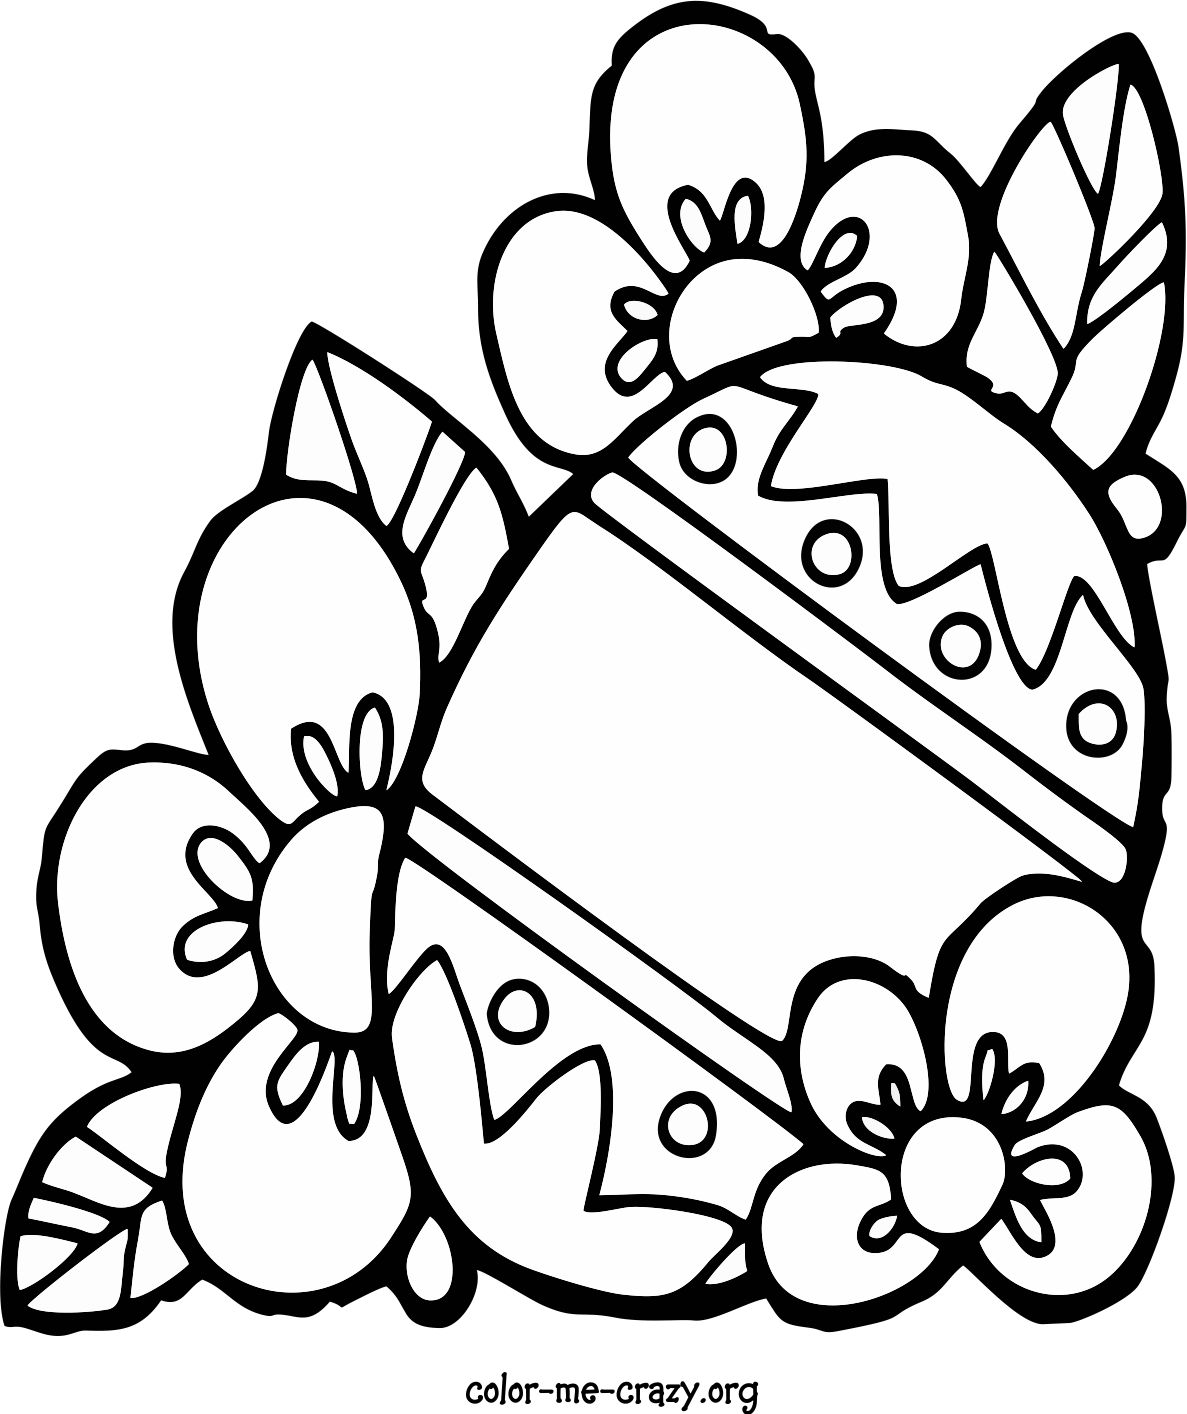 ColorMeCrazy.org: Easter Coloring Pages